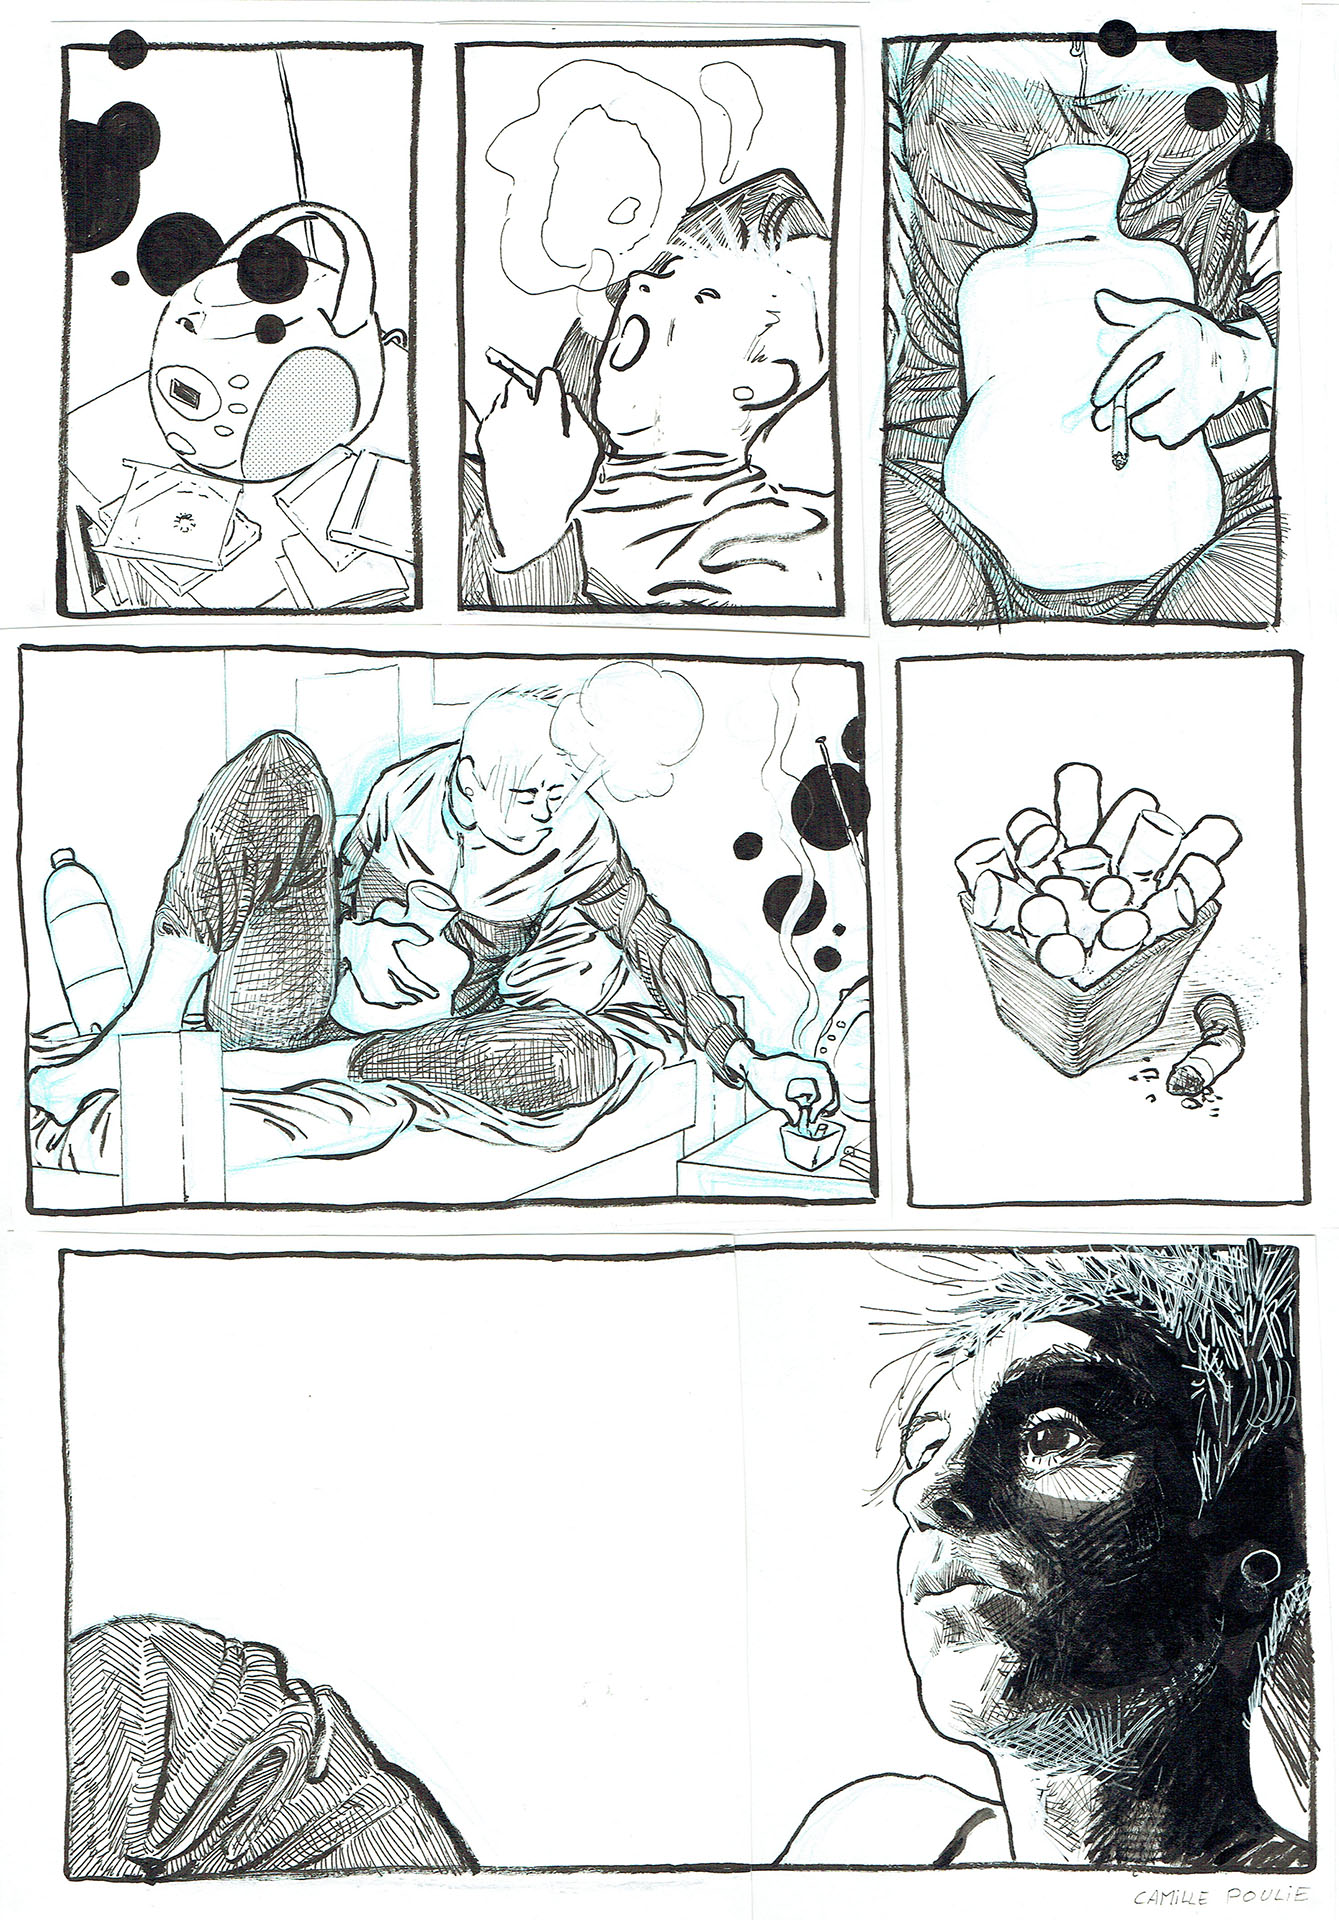 Camille POULIE | Bunker — Page 22